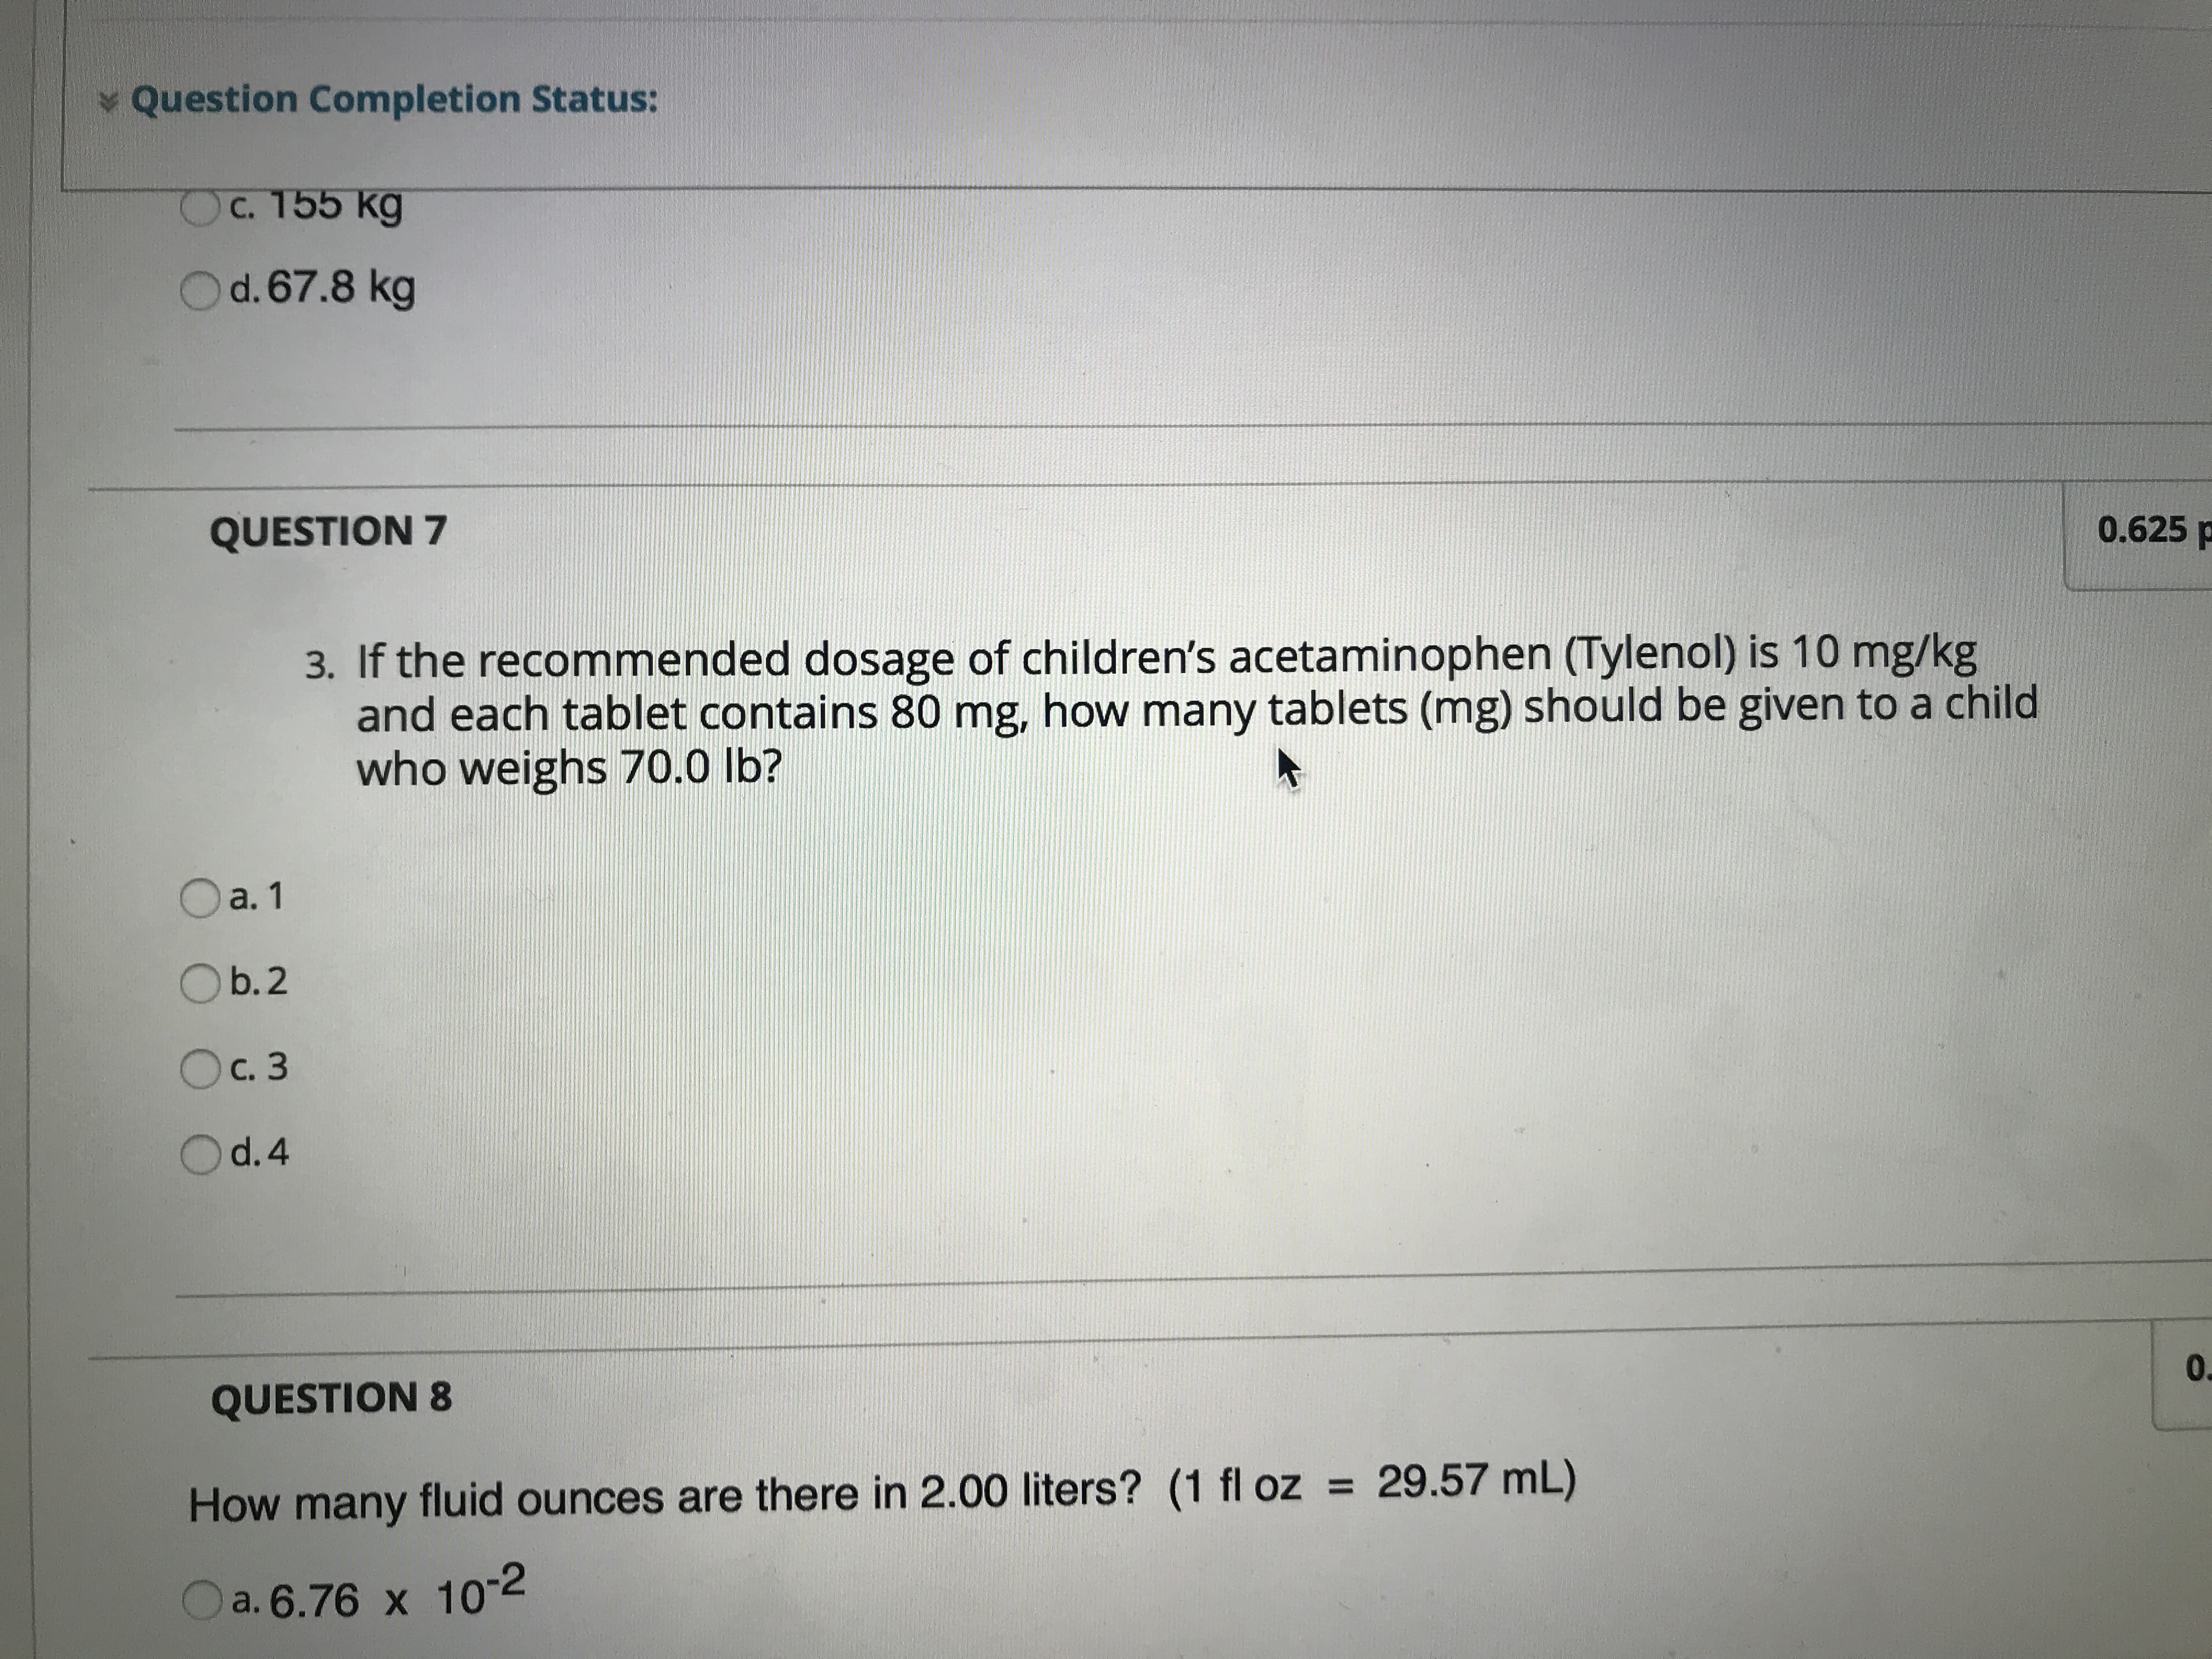 Question Completion Status:
Ос. 155 кg
O d. 67.8 kg
0.625 p
QUESTION 7
3. If the recommended dosage of children's acetaminophen (Tylenol) is 10 mg/kg
and each tablet contains 80 mg, how many tablets (mg) should be given to a child
who weighs 70.0 lb?
a. 1
Ob.2
Ос. 3
O d.4
0.
QUESTION 8
29.57 mL)
How many fluid ounces are there in 2.00 liters? (1 fl oz
a. 6.76 x 102
